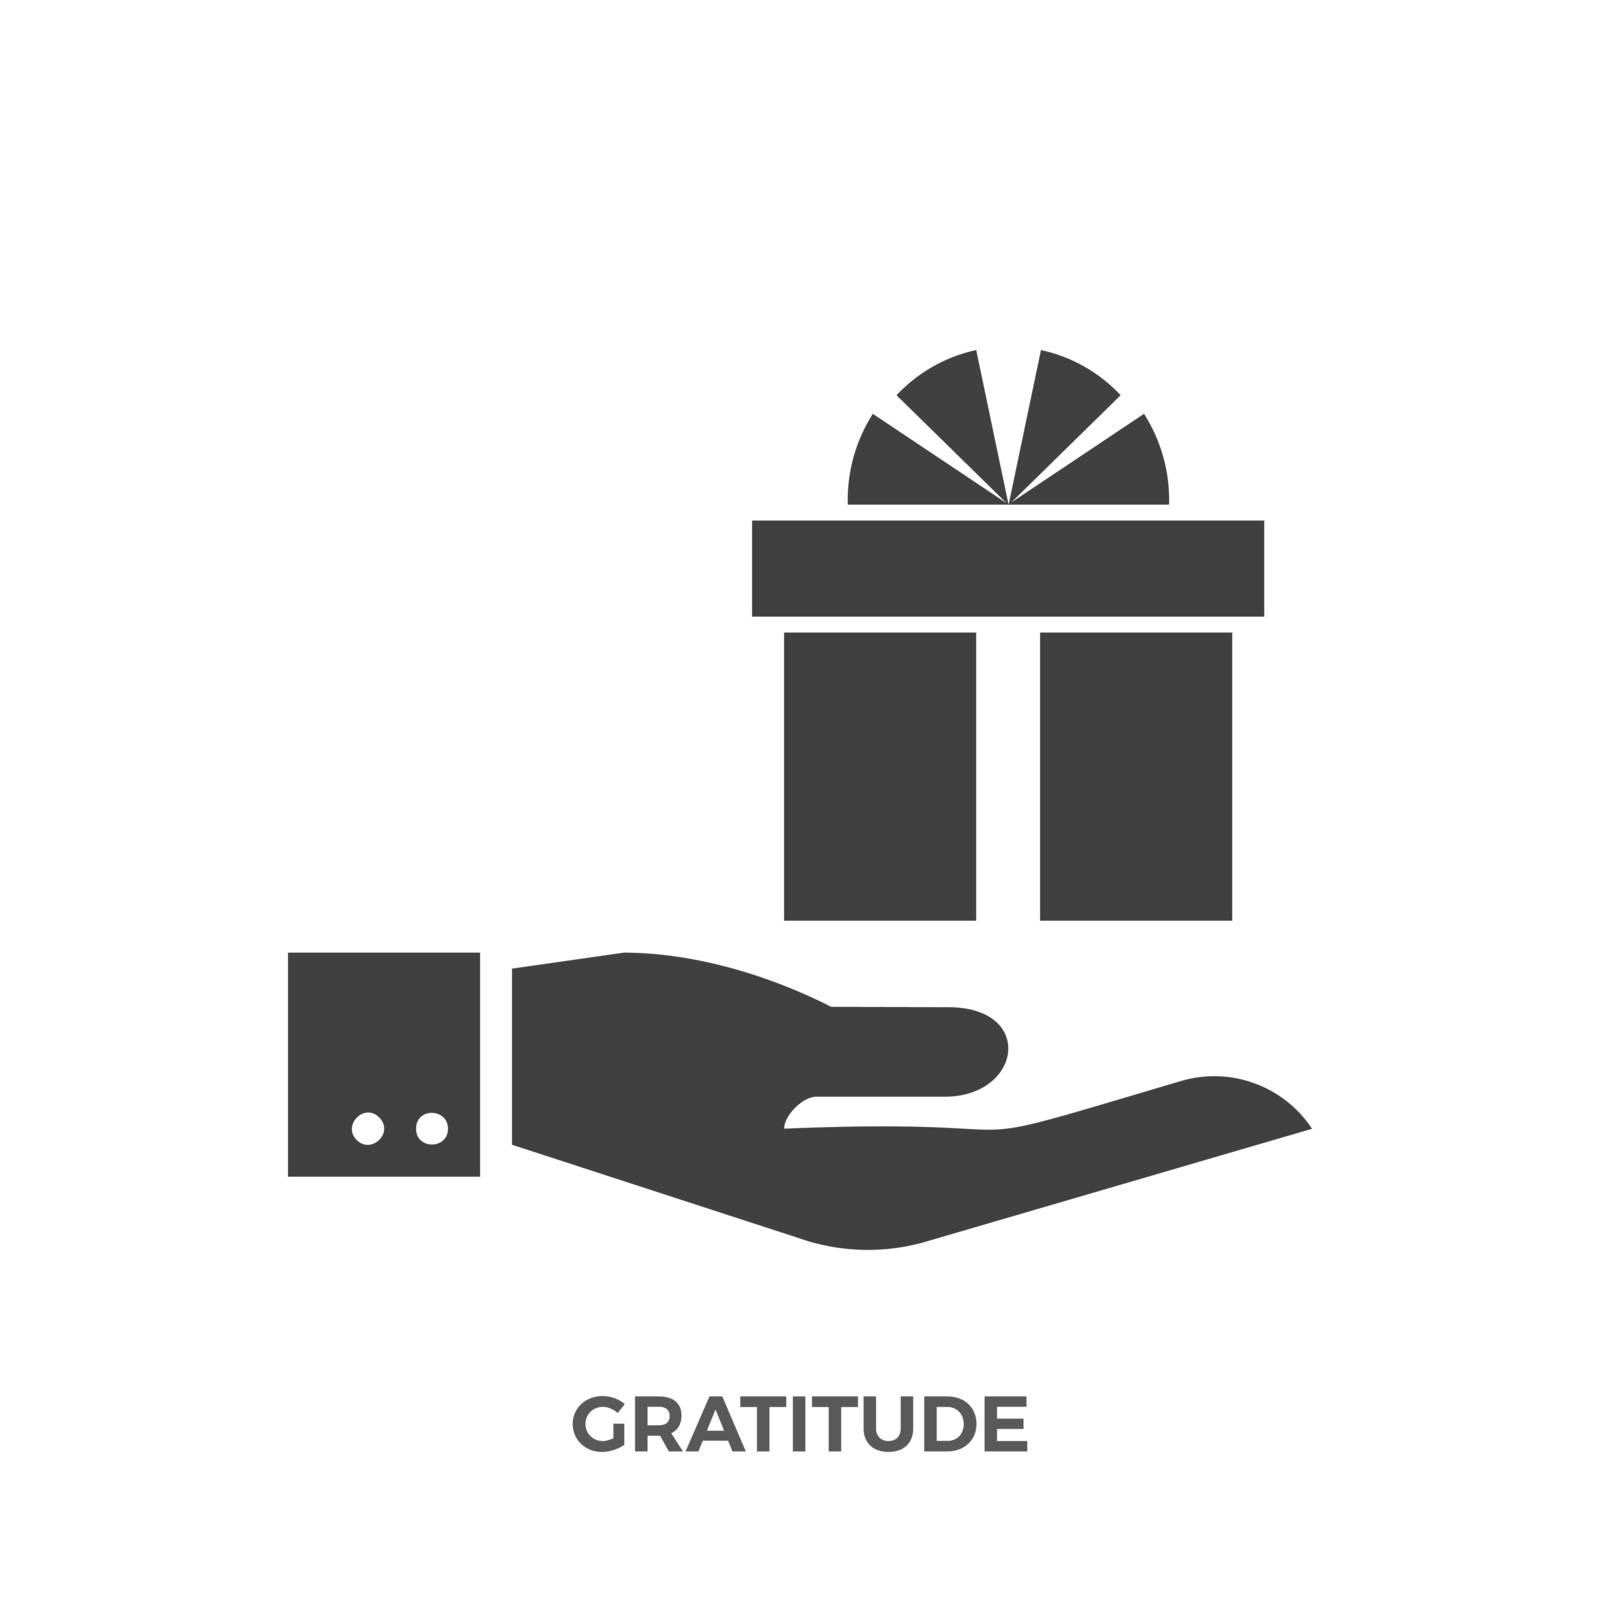 Gratitude Glyph Vector Icon Isolated on the White Background.